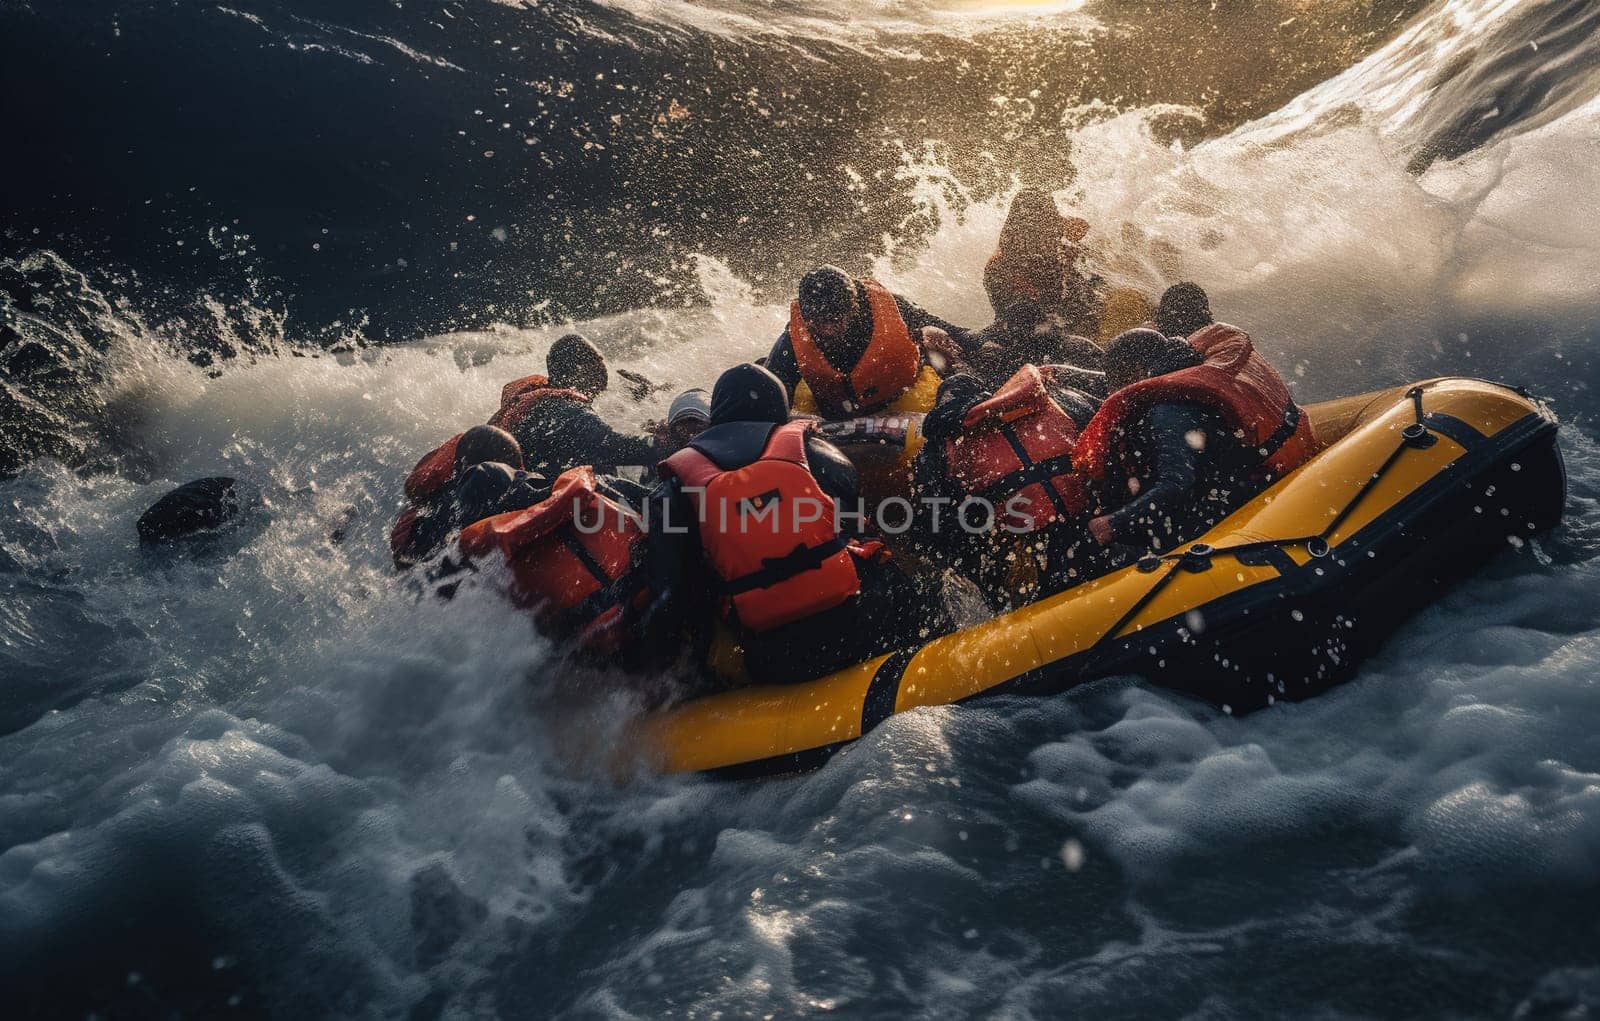 group of refugees in life jackets on rubber boat in middle of raging waves in the ocean migration crisis problems by KaterinaDalemans